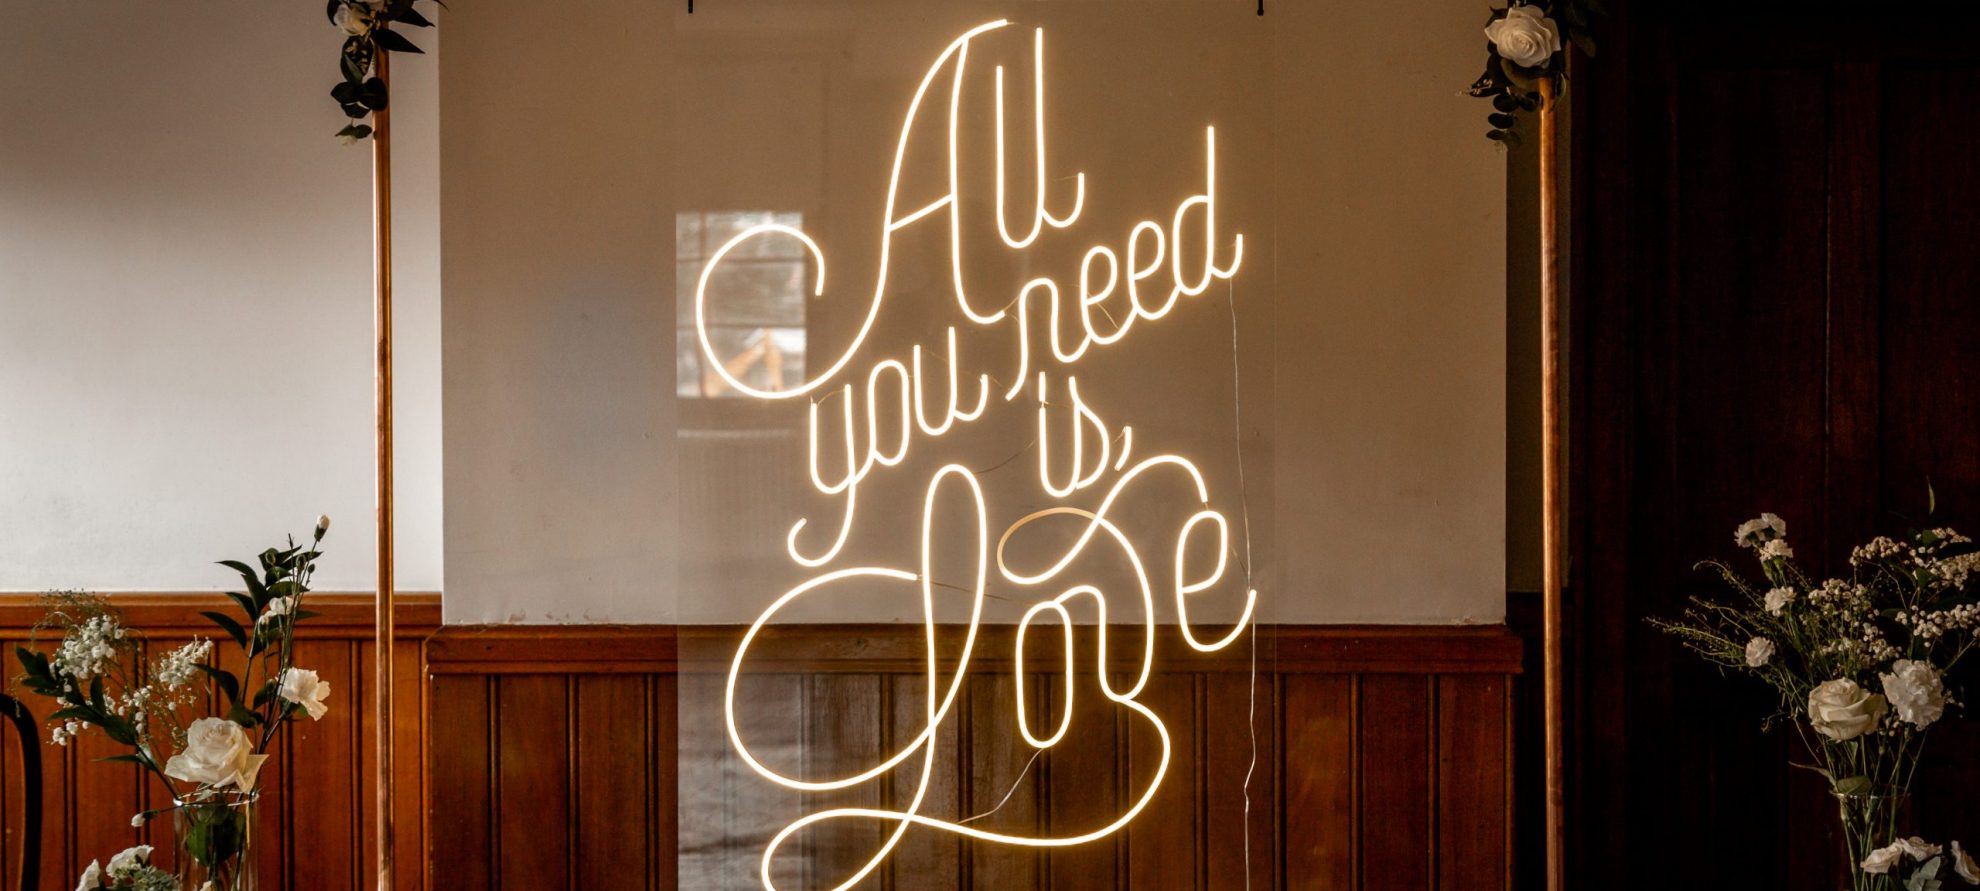 Isabelle Biggs Photography - "All you need is love" sign - Anne & Daniel